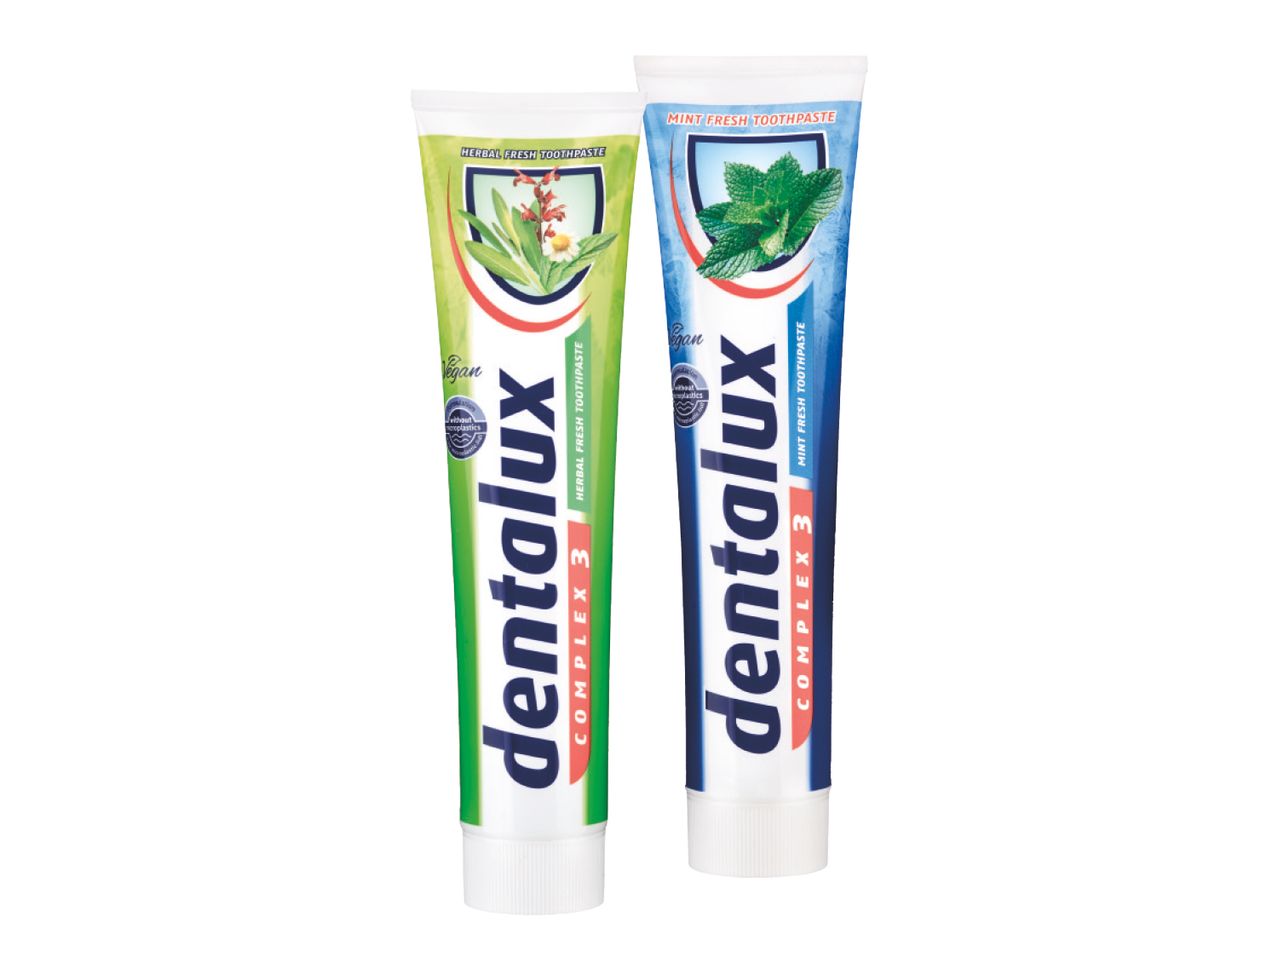 Go to full screen view: Toothpaste with Floride - Image 1